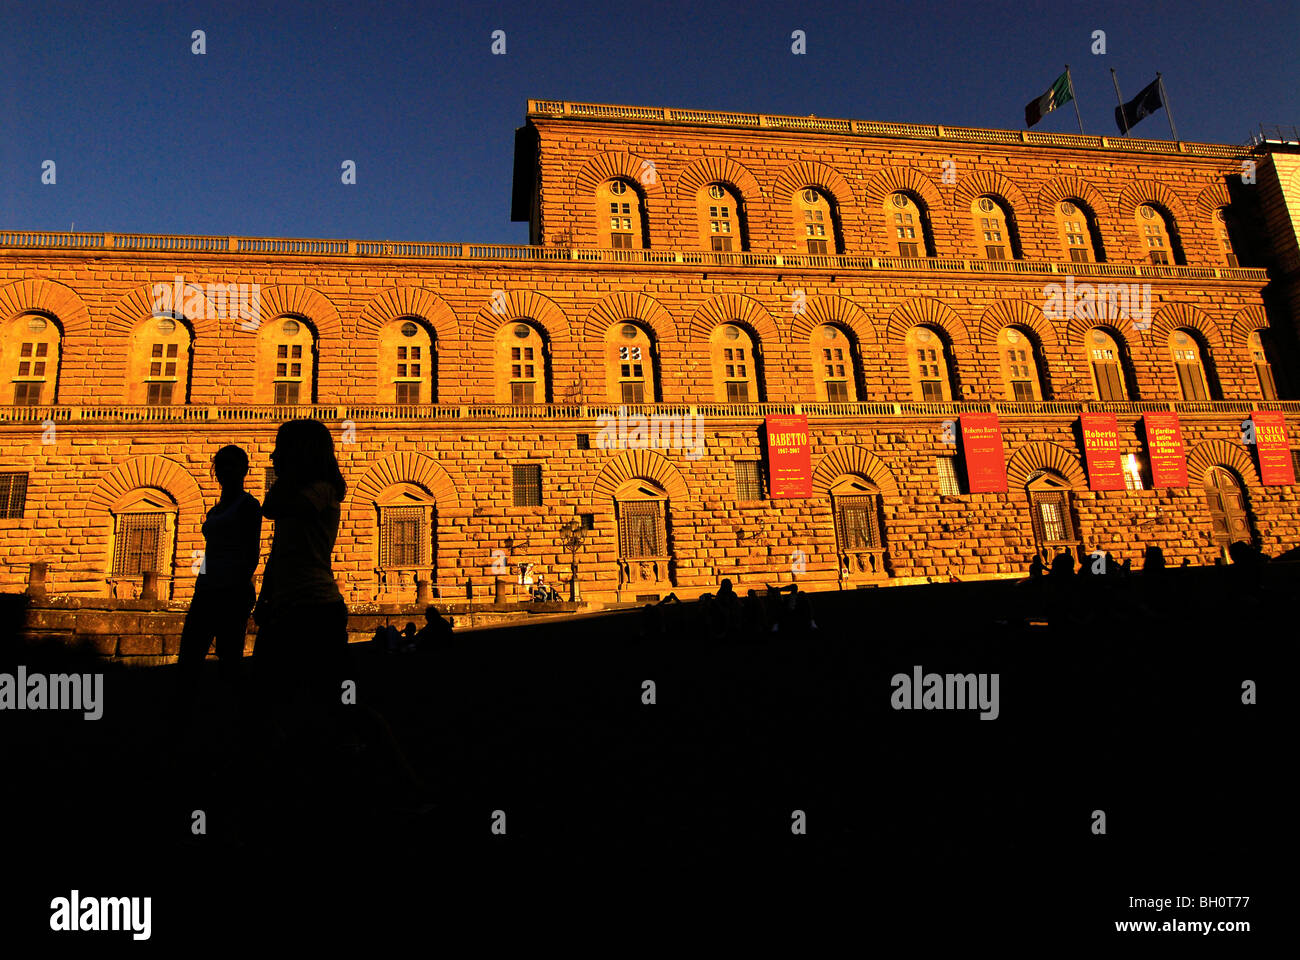 Shadows on the facade of Palazzo Pitti in the evening light, Florence, Tuscany, Italy, Europe Stock Photo